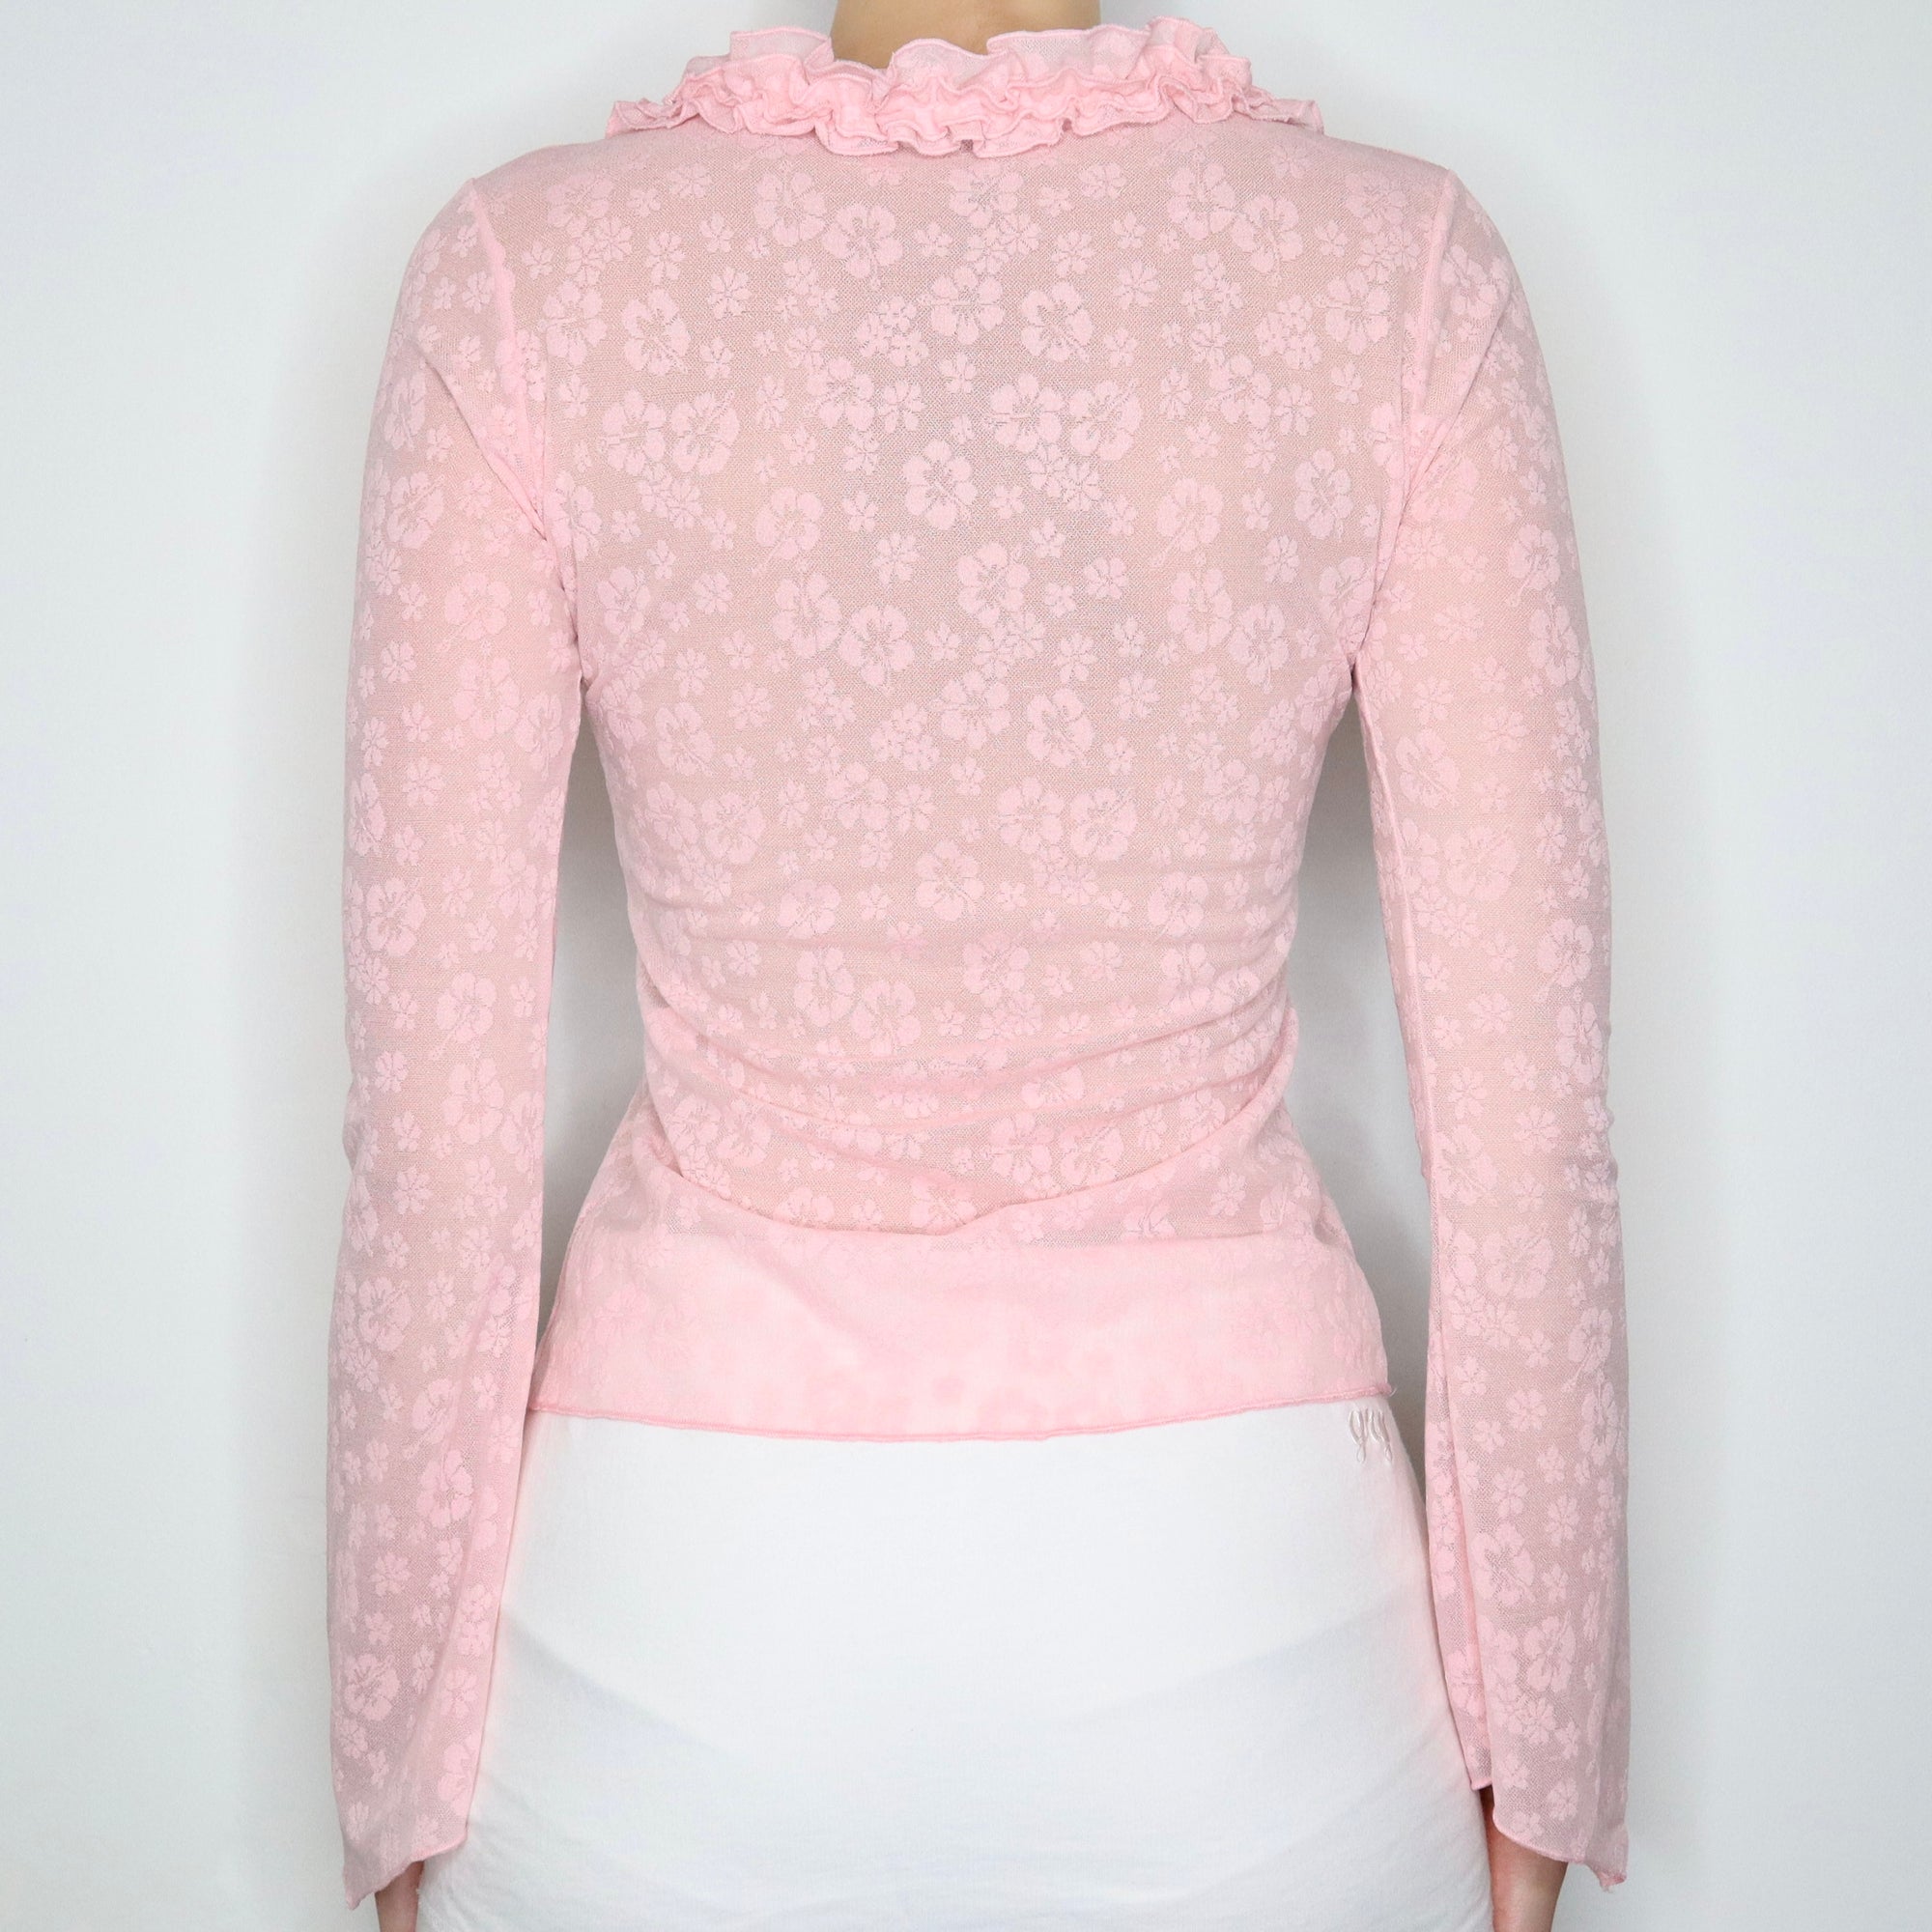 Vintage Early 2000s Pastel Pink Hibiscus Mesh Blouse